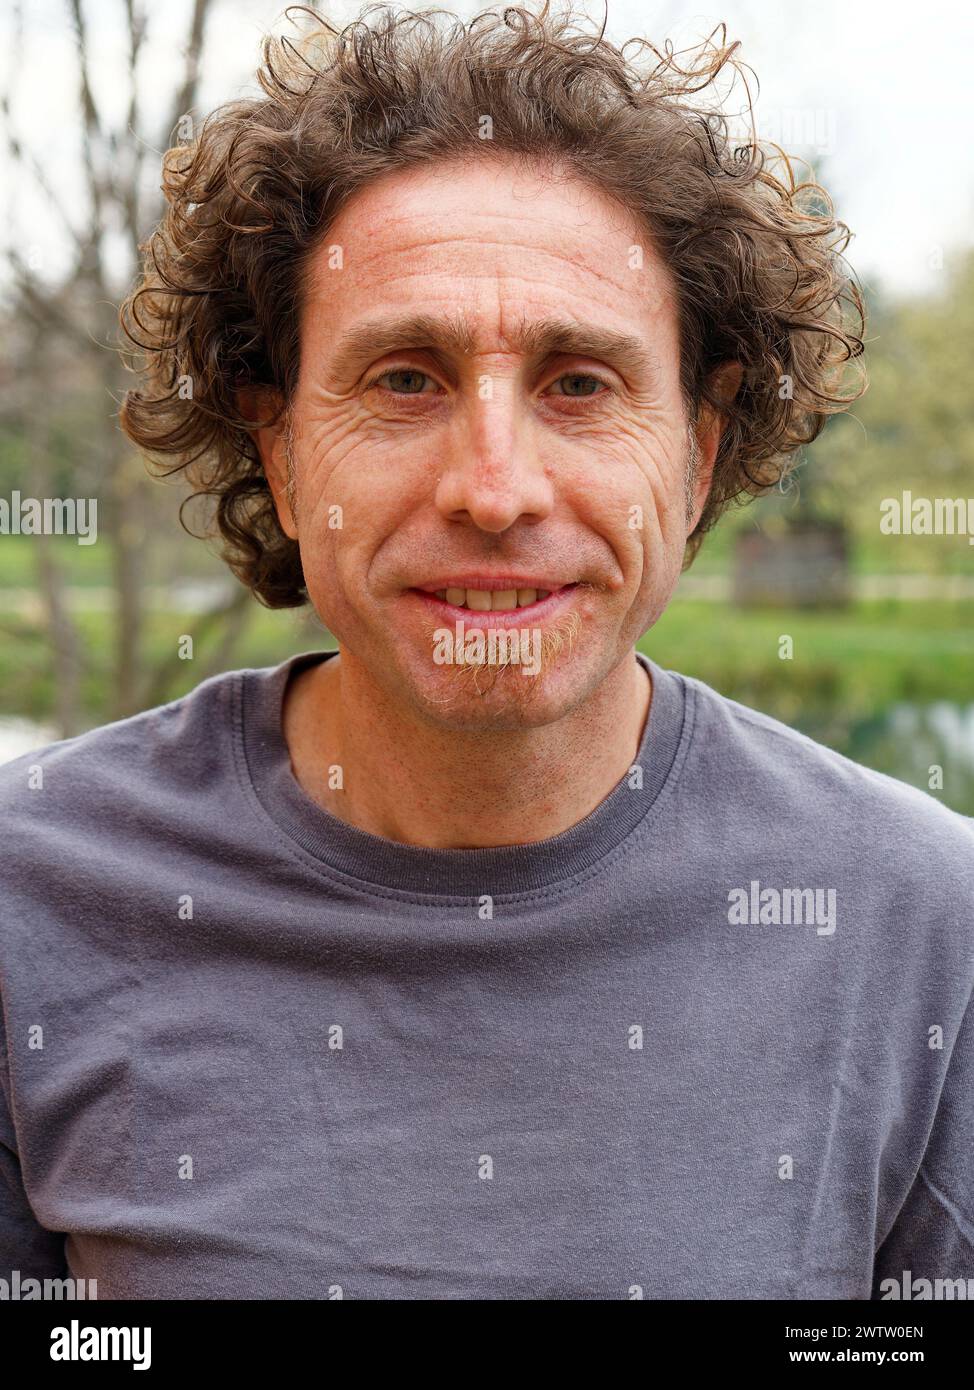 Man with curly hair outdoors Stock Photo